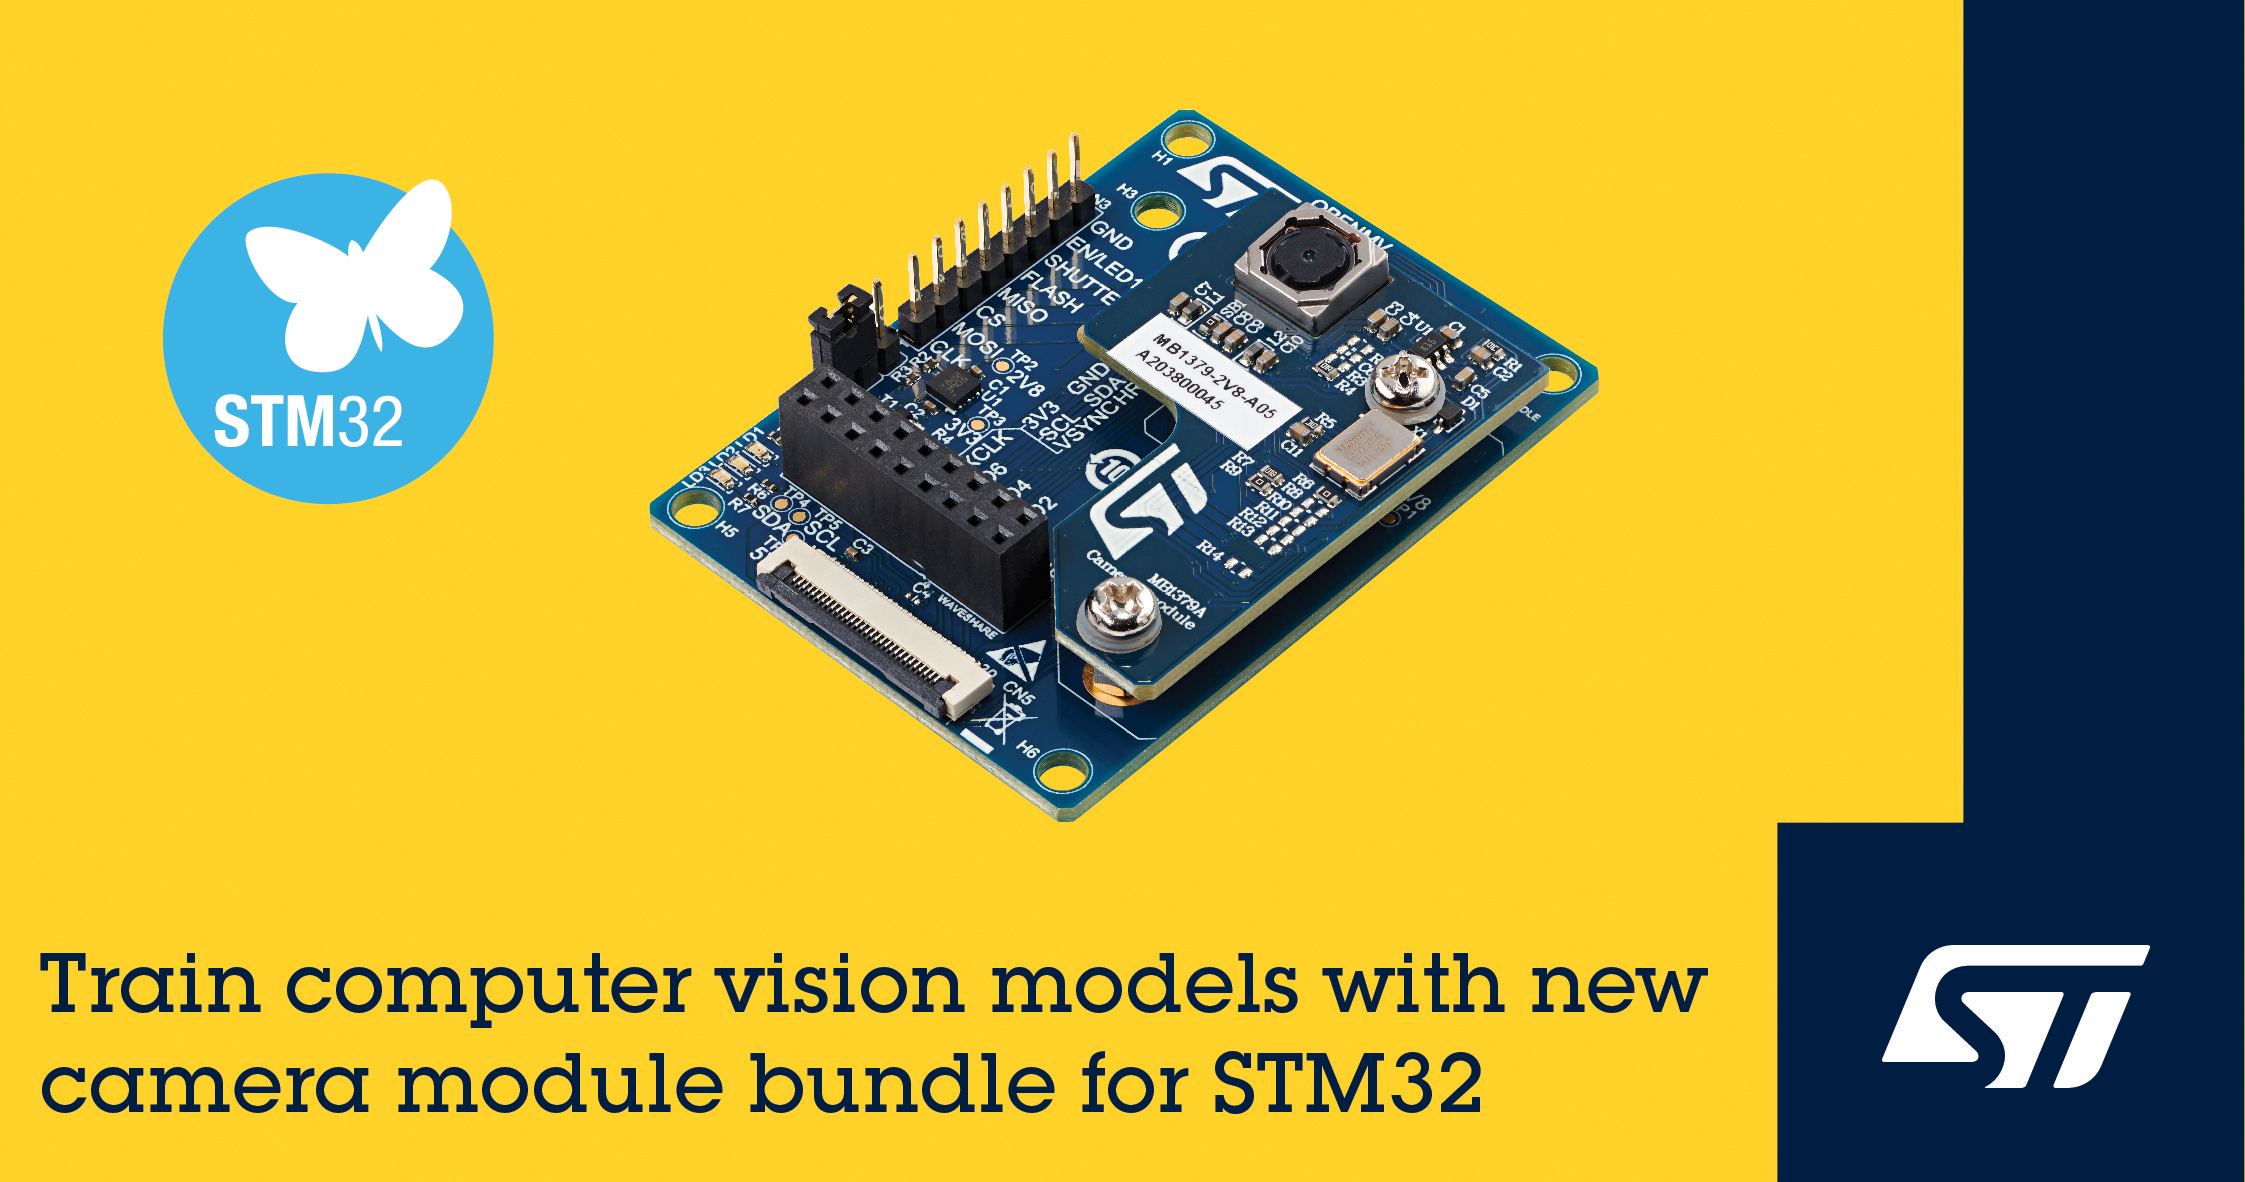 STMicroelectronics Powers Affordable Edge AI Development with Computer-Vision Launchpad for STM32 Microcontrollers